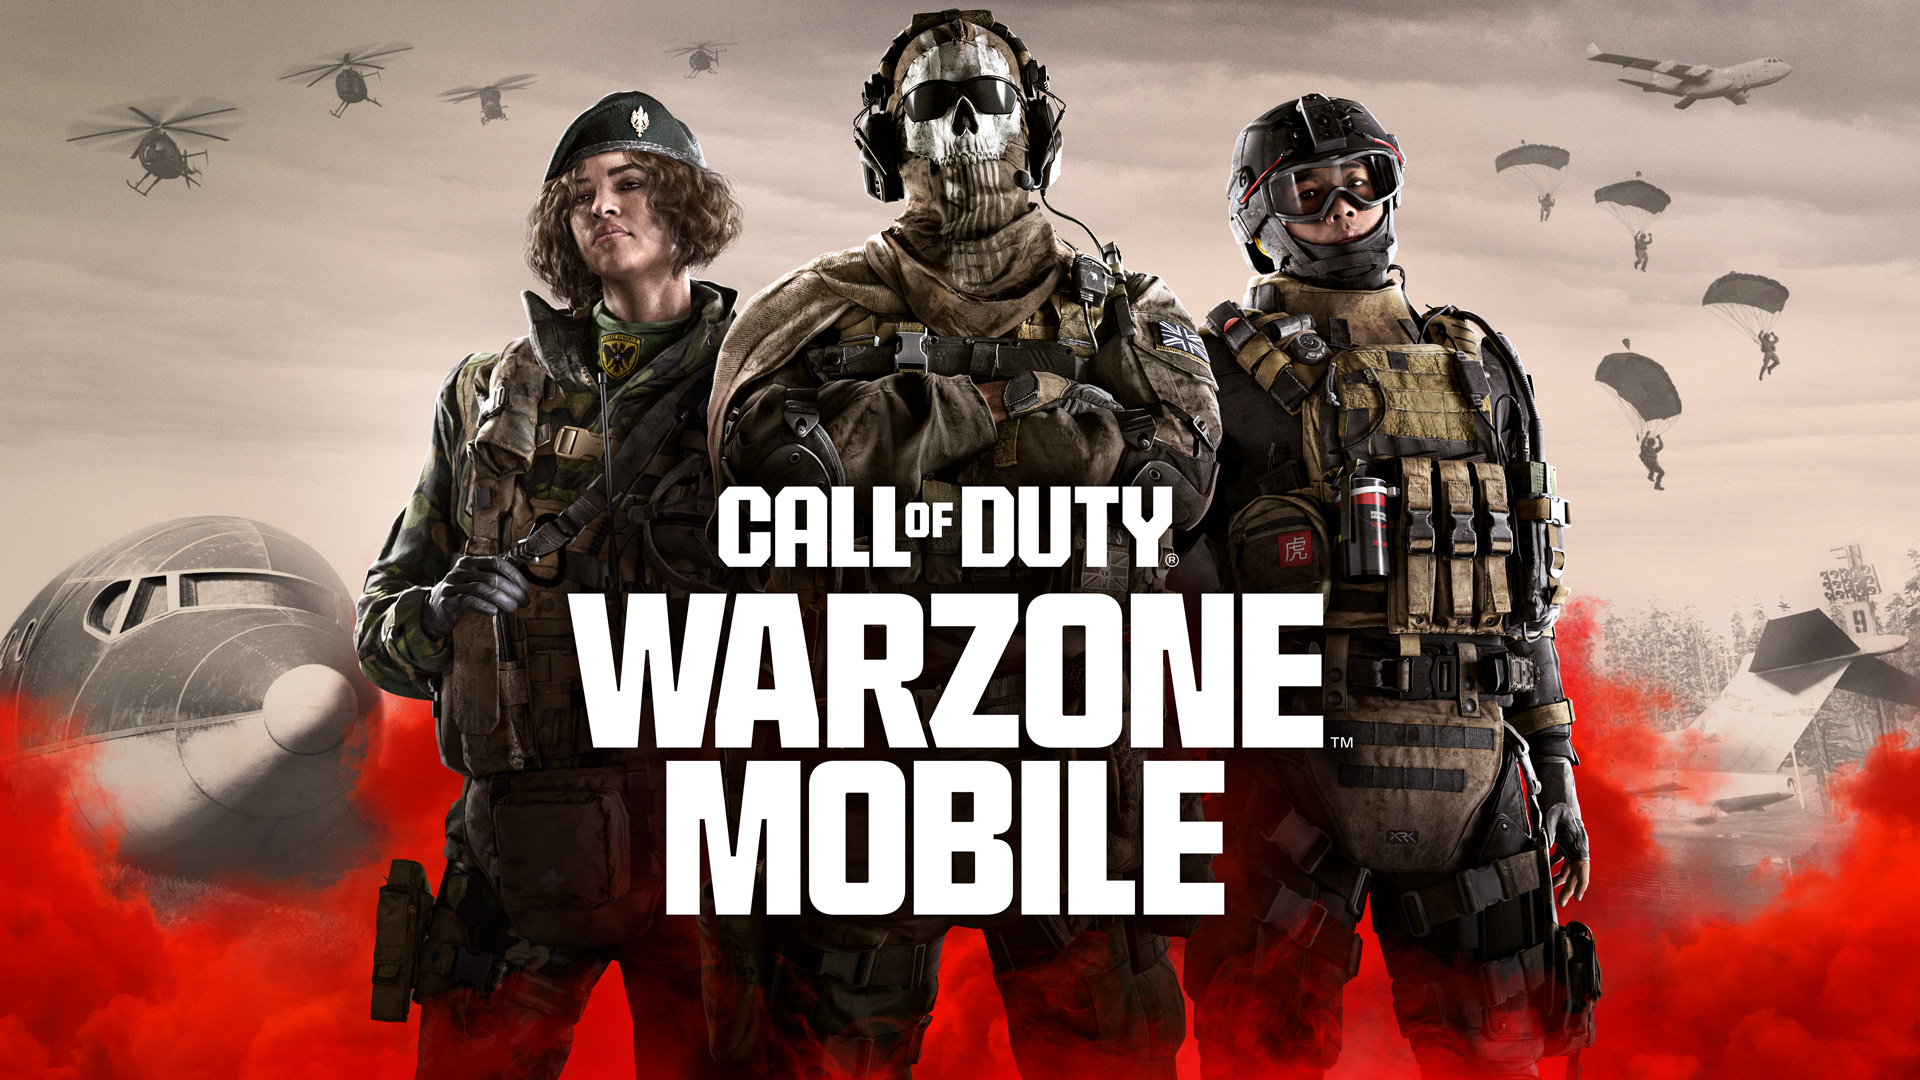 Call of Duty: Warzone Mobile - The Ultimate Battle Royale Experience on the Go image